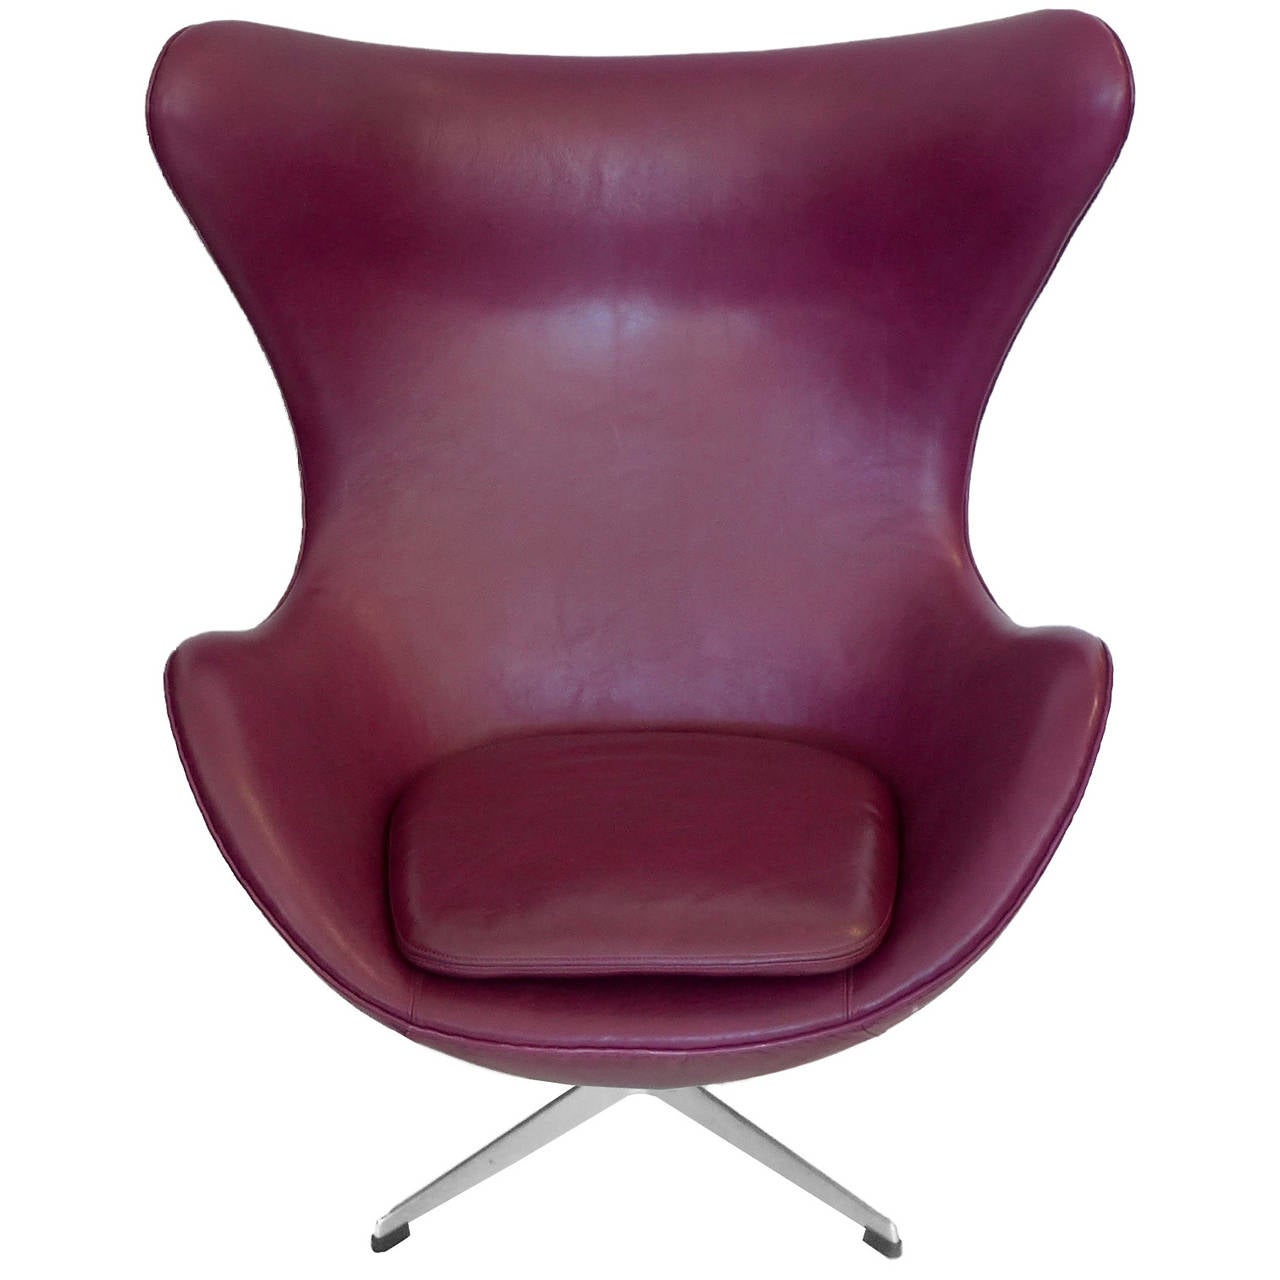 Danish Pair of Original Egg Chairs with Ottomans by Arne Jacobsen in Mulberry Leather For Sale